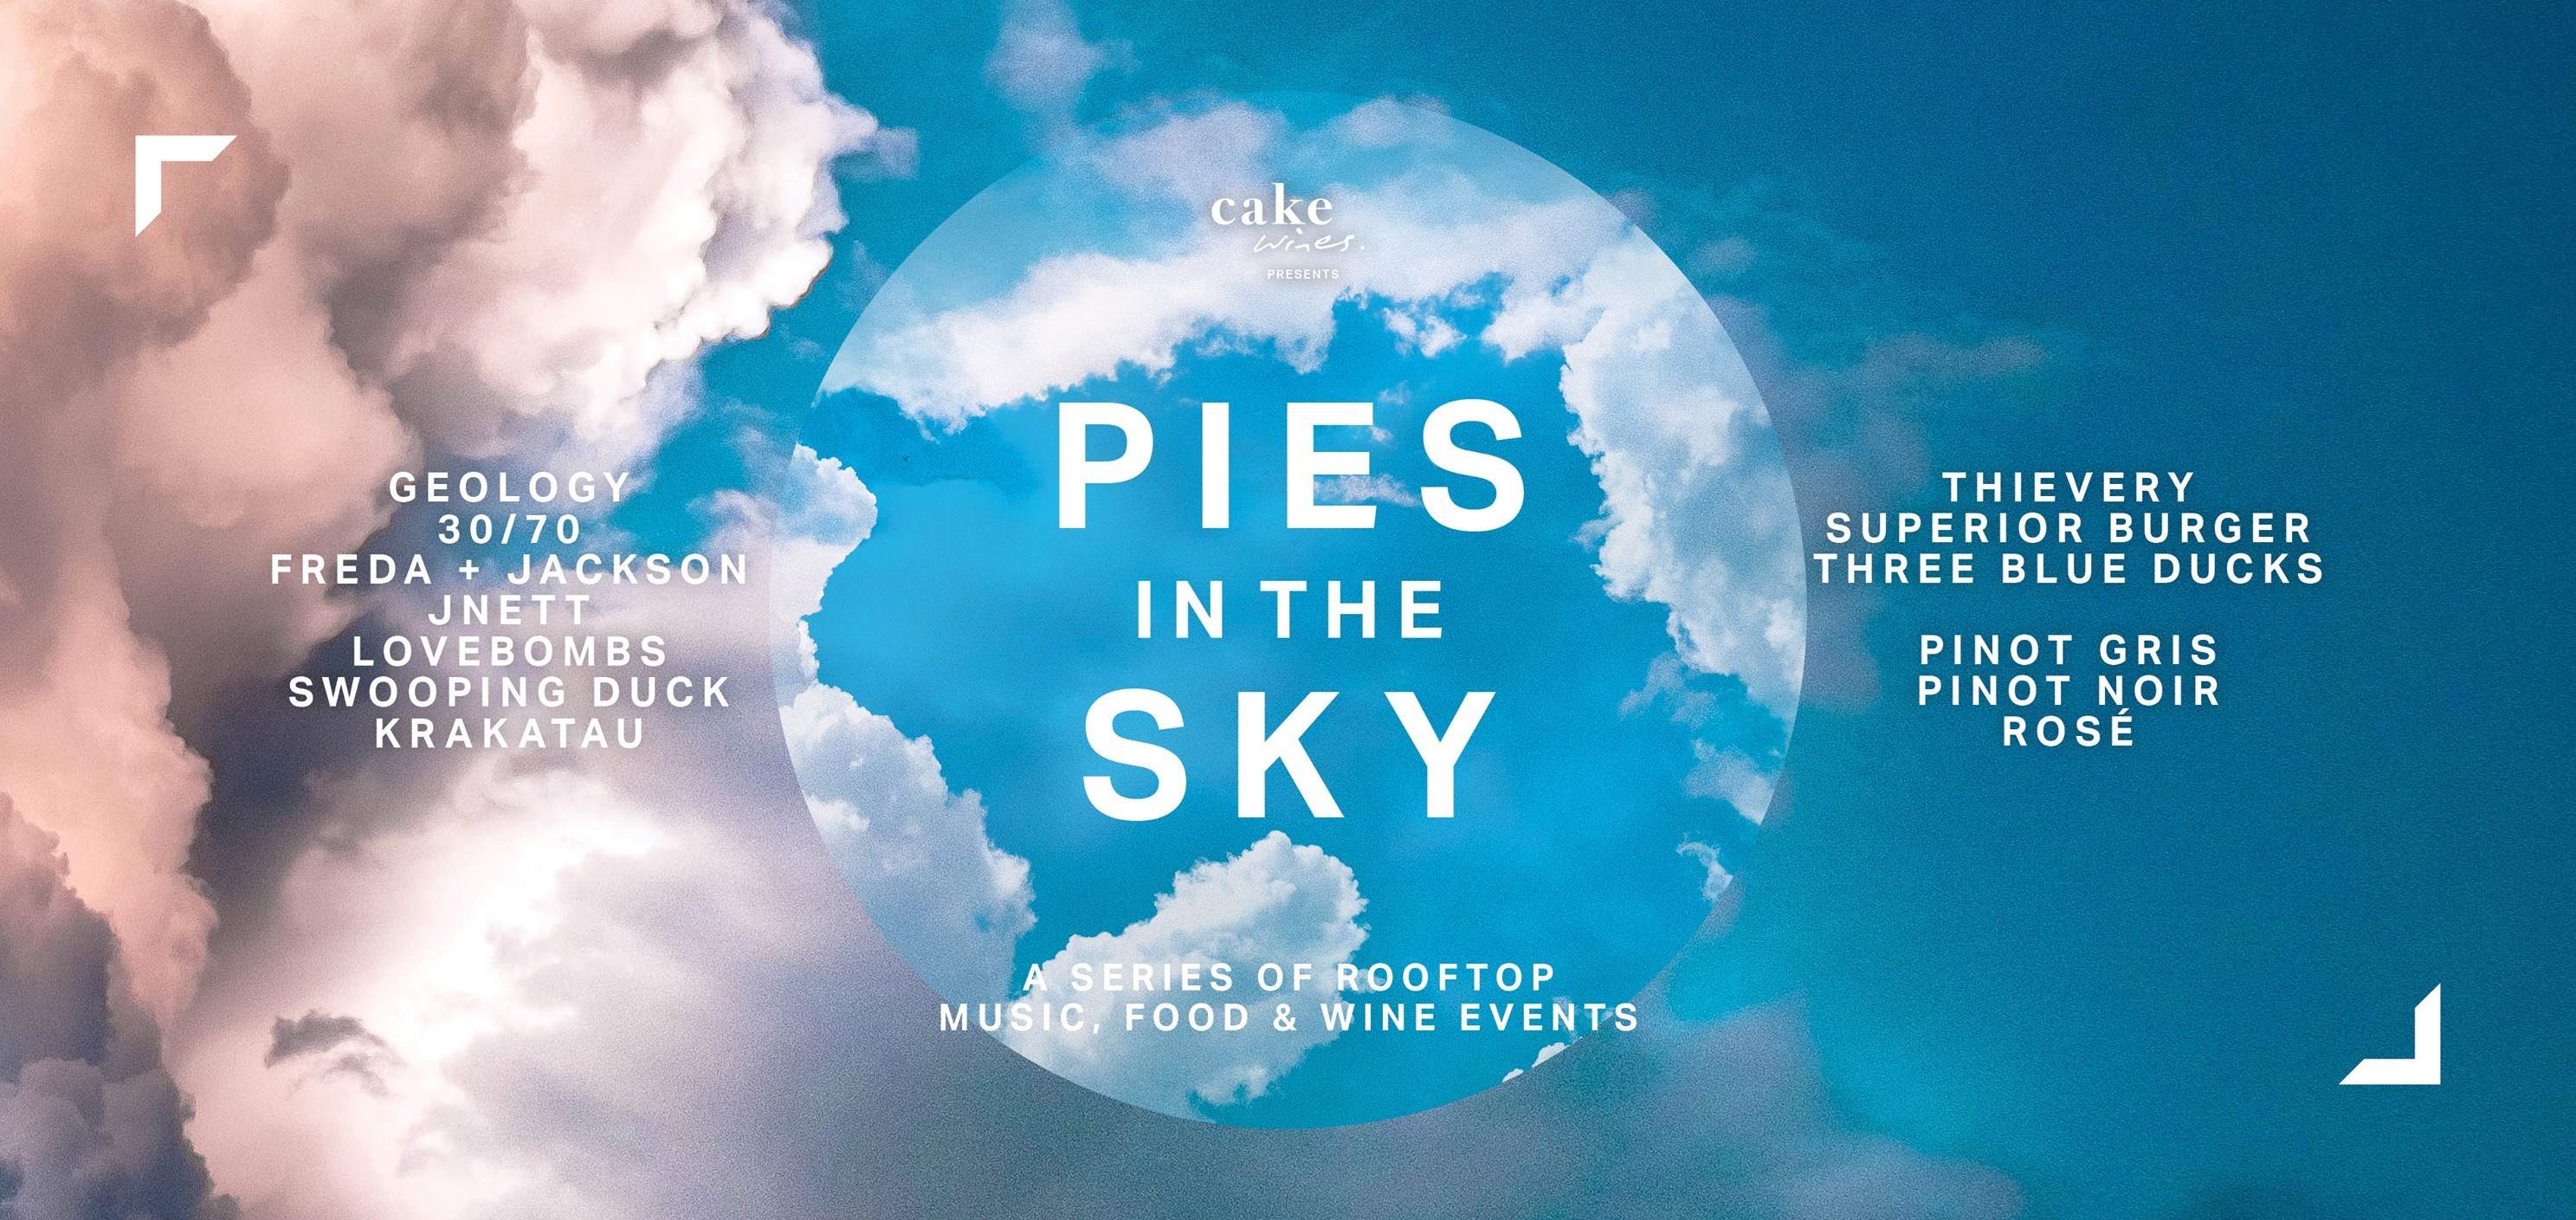 Cake Wines presents - Pies in the Sky - Página frontal